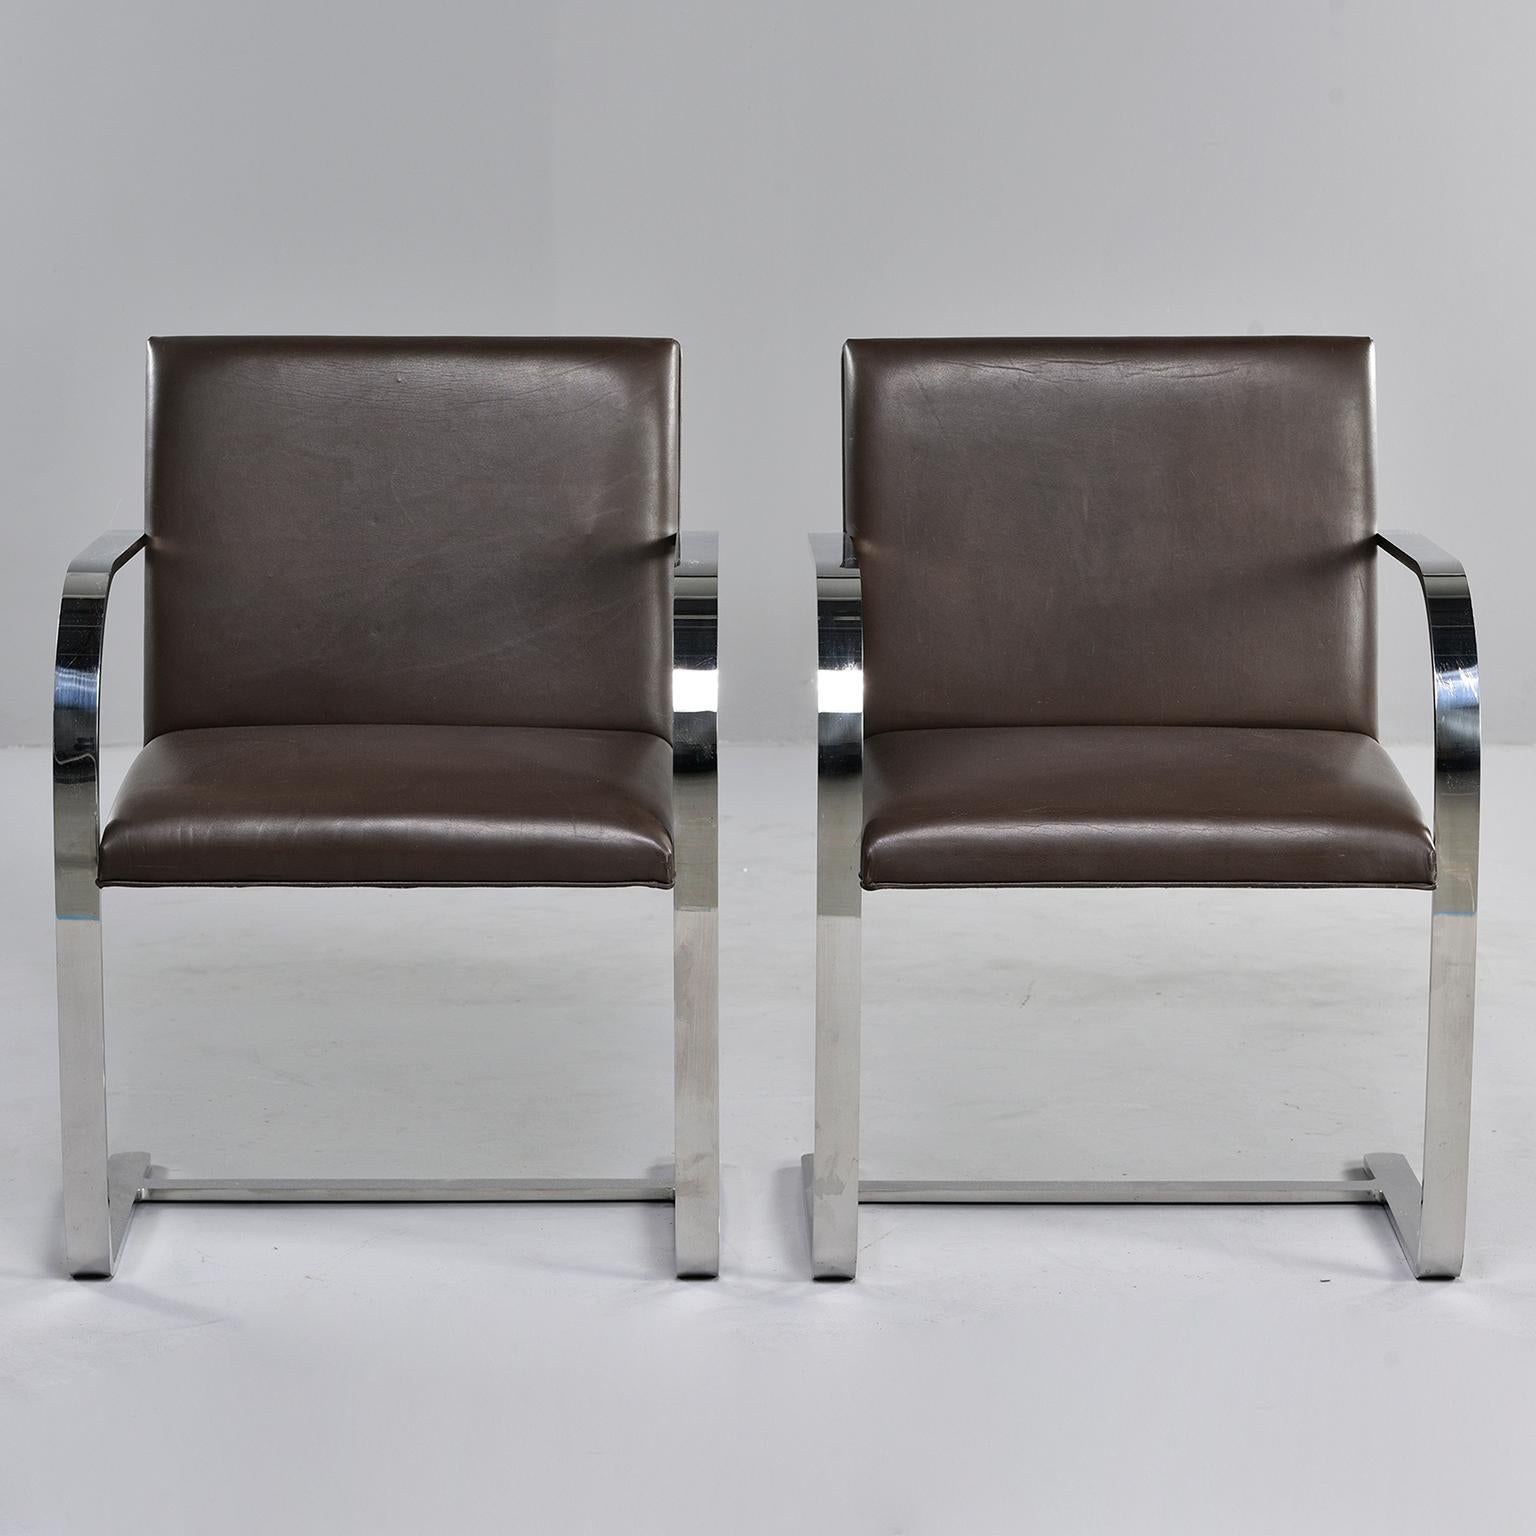 Bruno Flat Bar Chairs - For Sale on 1stDibs